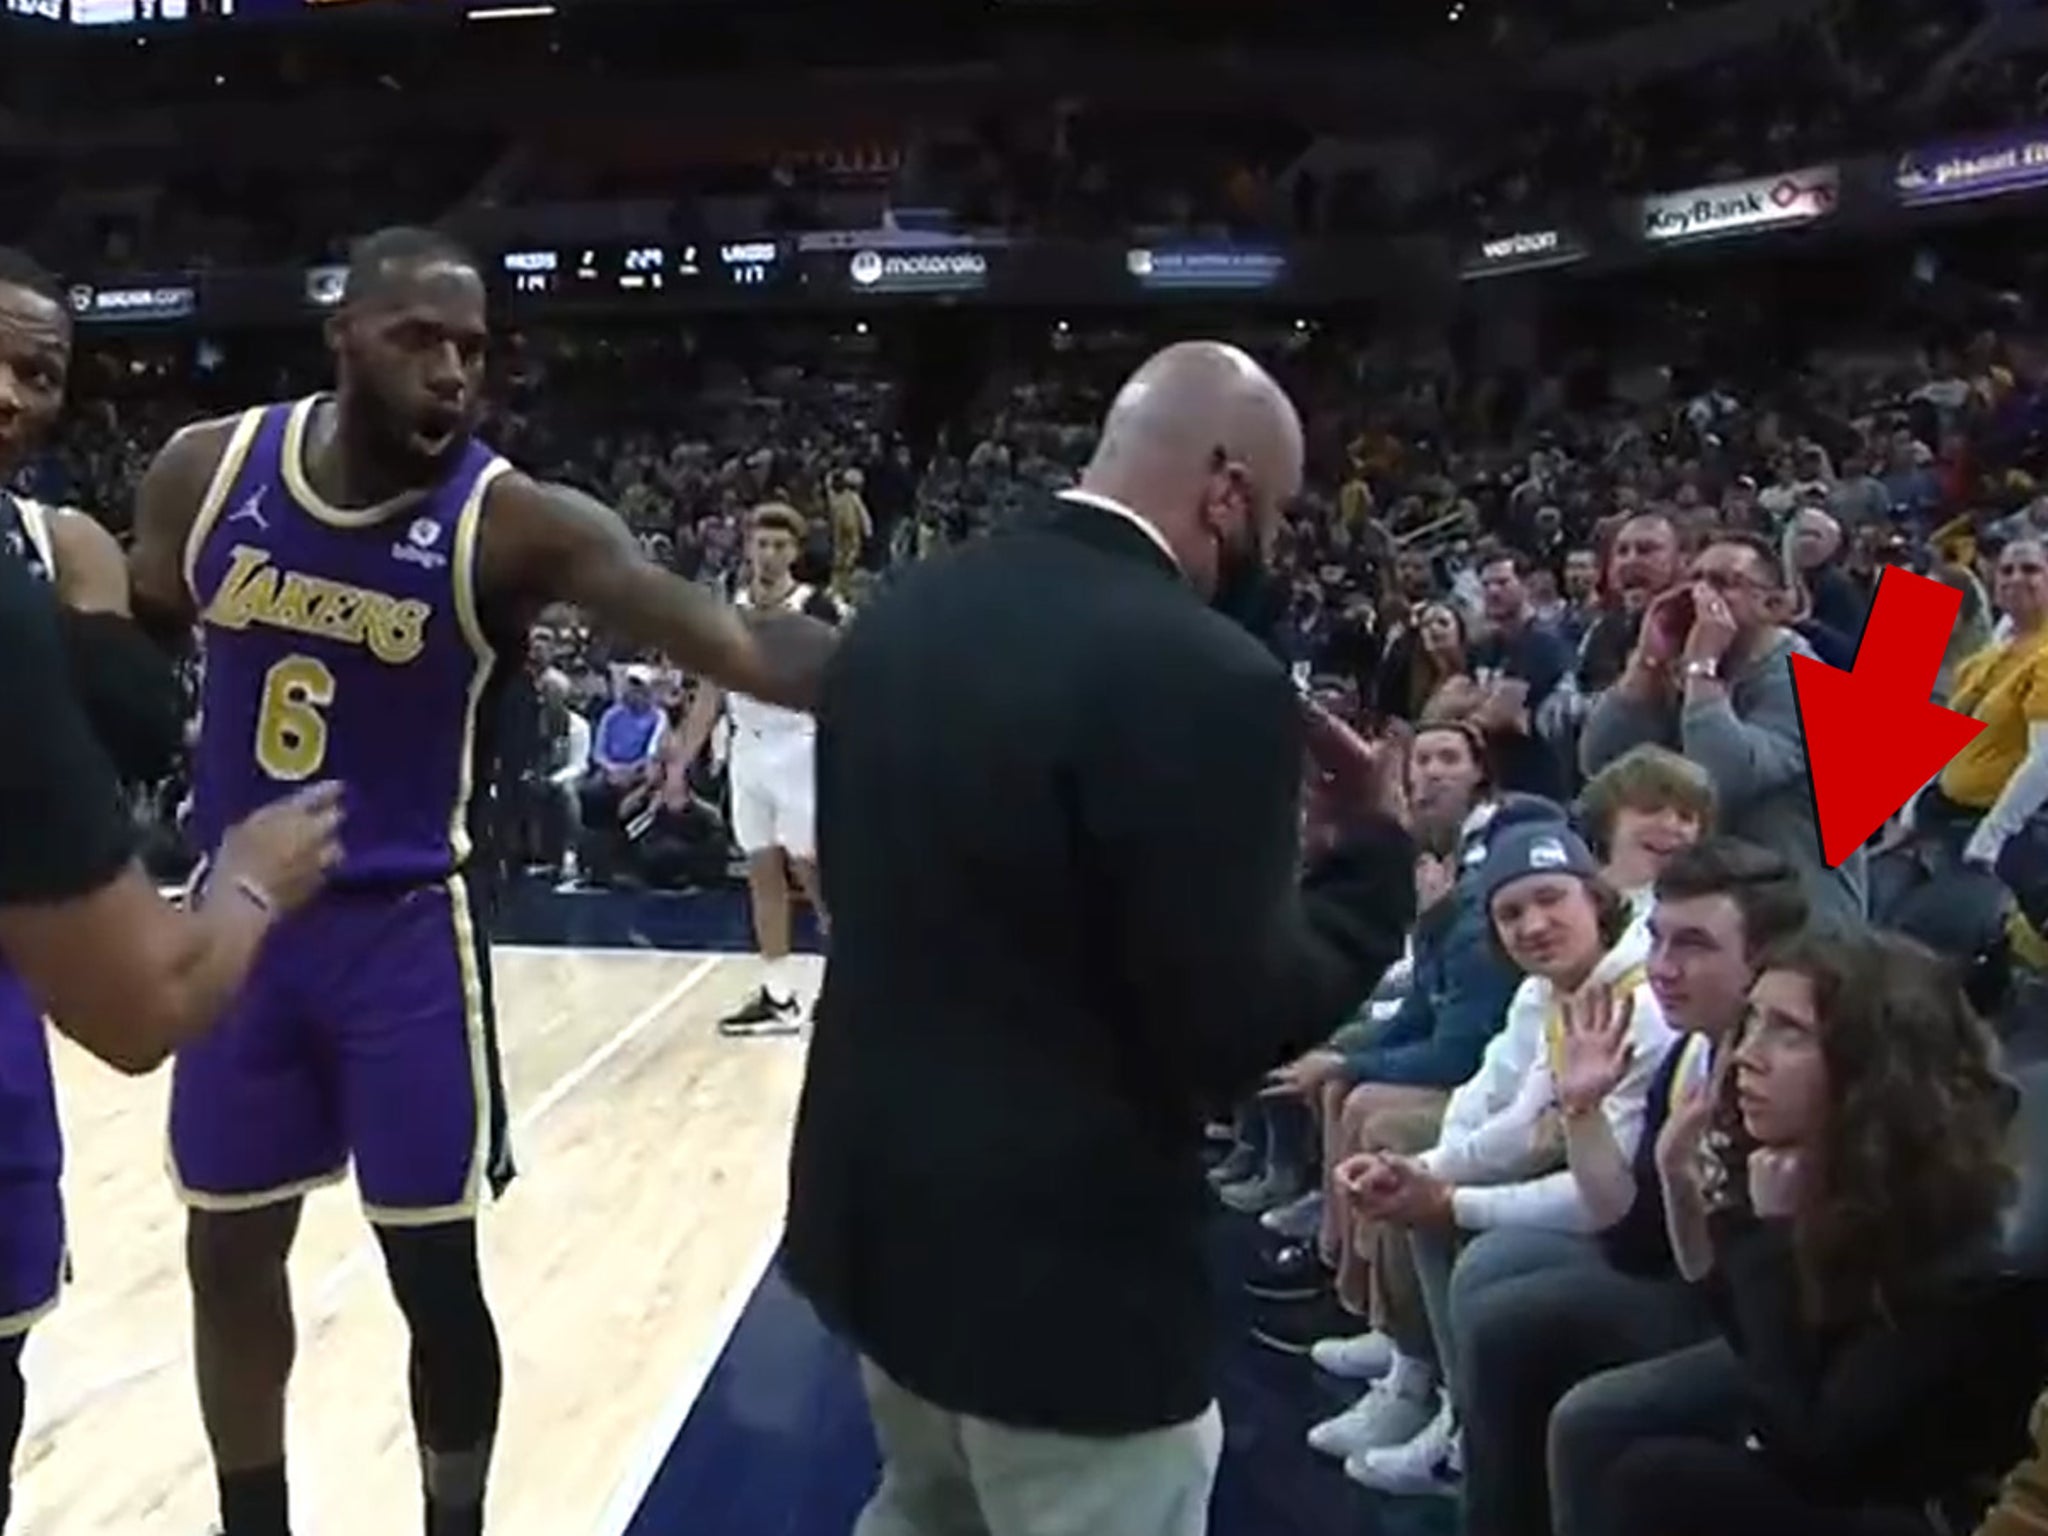 LeBron James has two fans ejected from courtside seats in Indiana